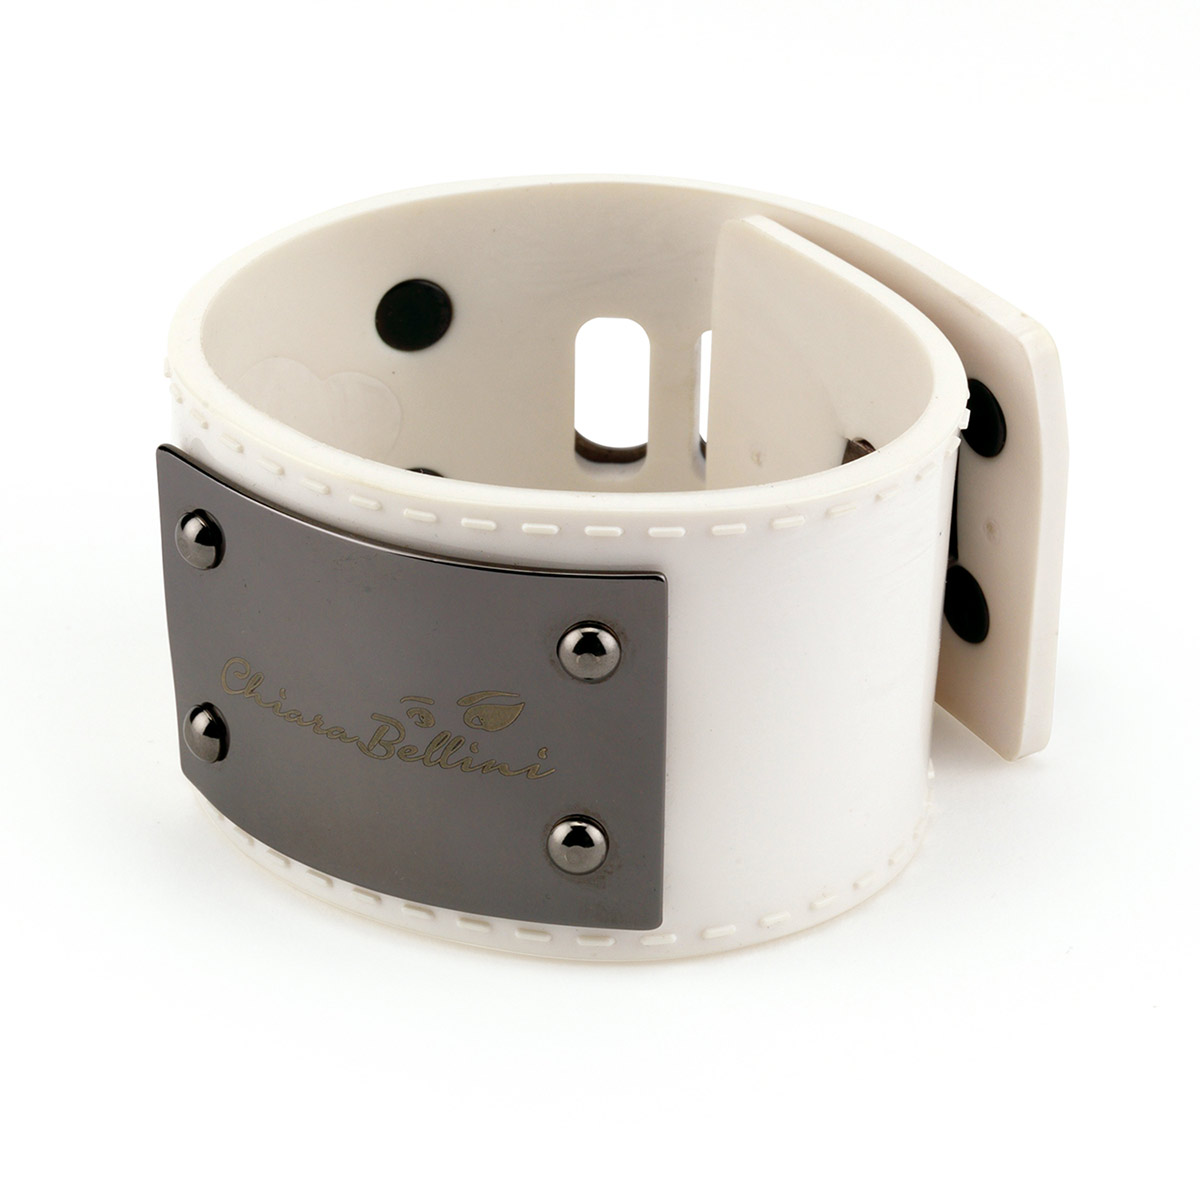 Bracelet in White Pvc with metal plate